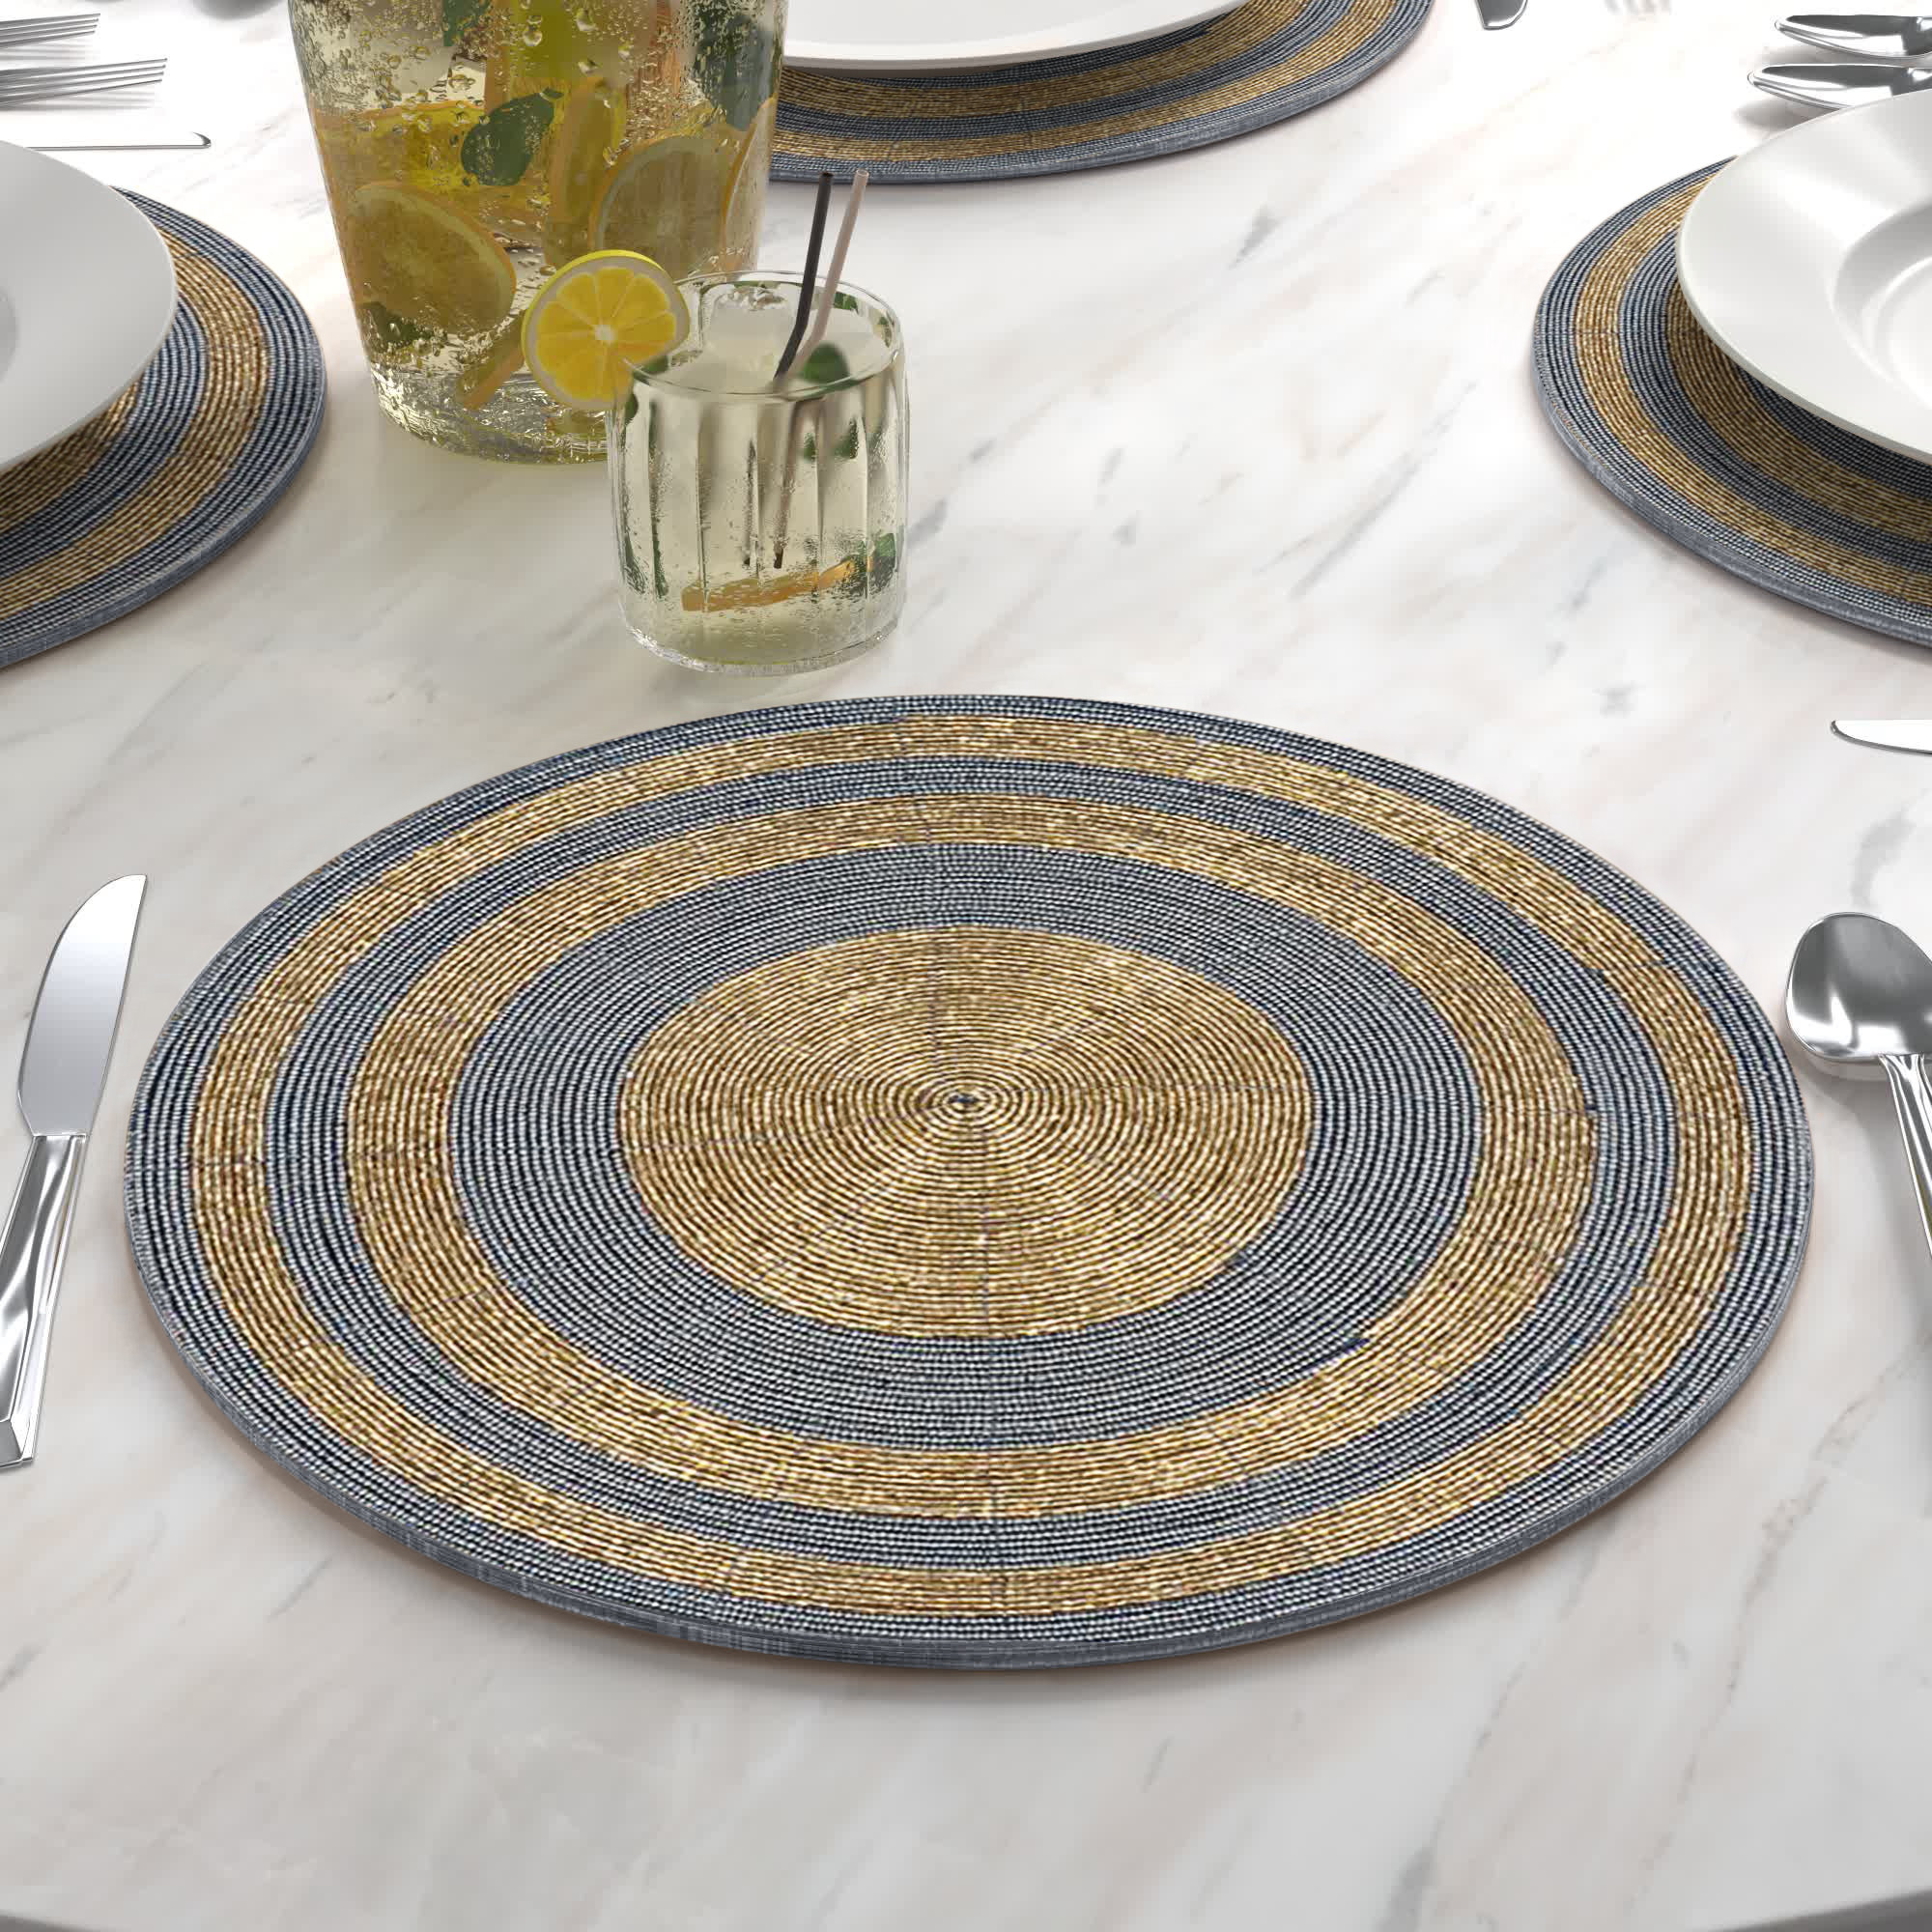 Lark Manor Anzalone Leather/Faux Leather Round Placemat & Reviews